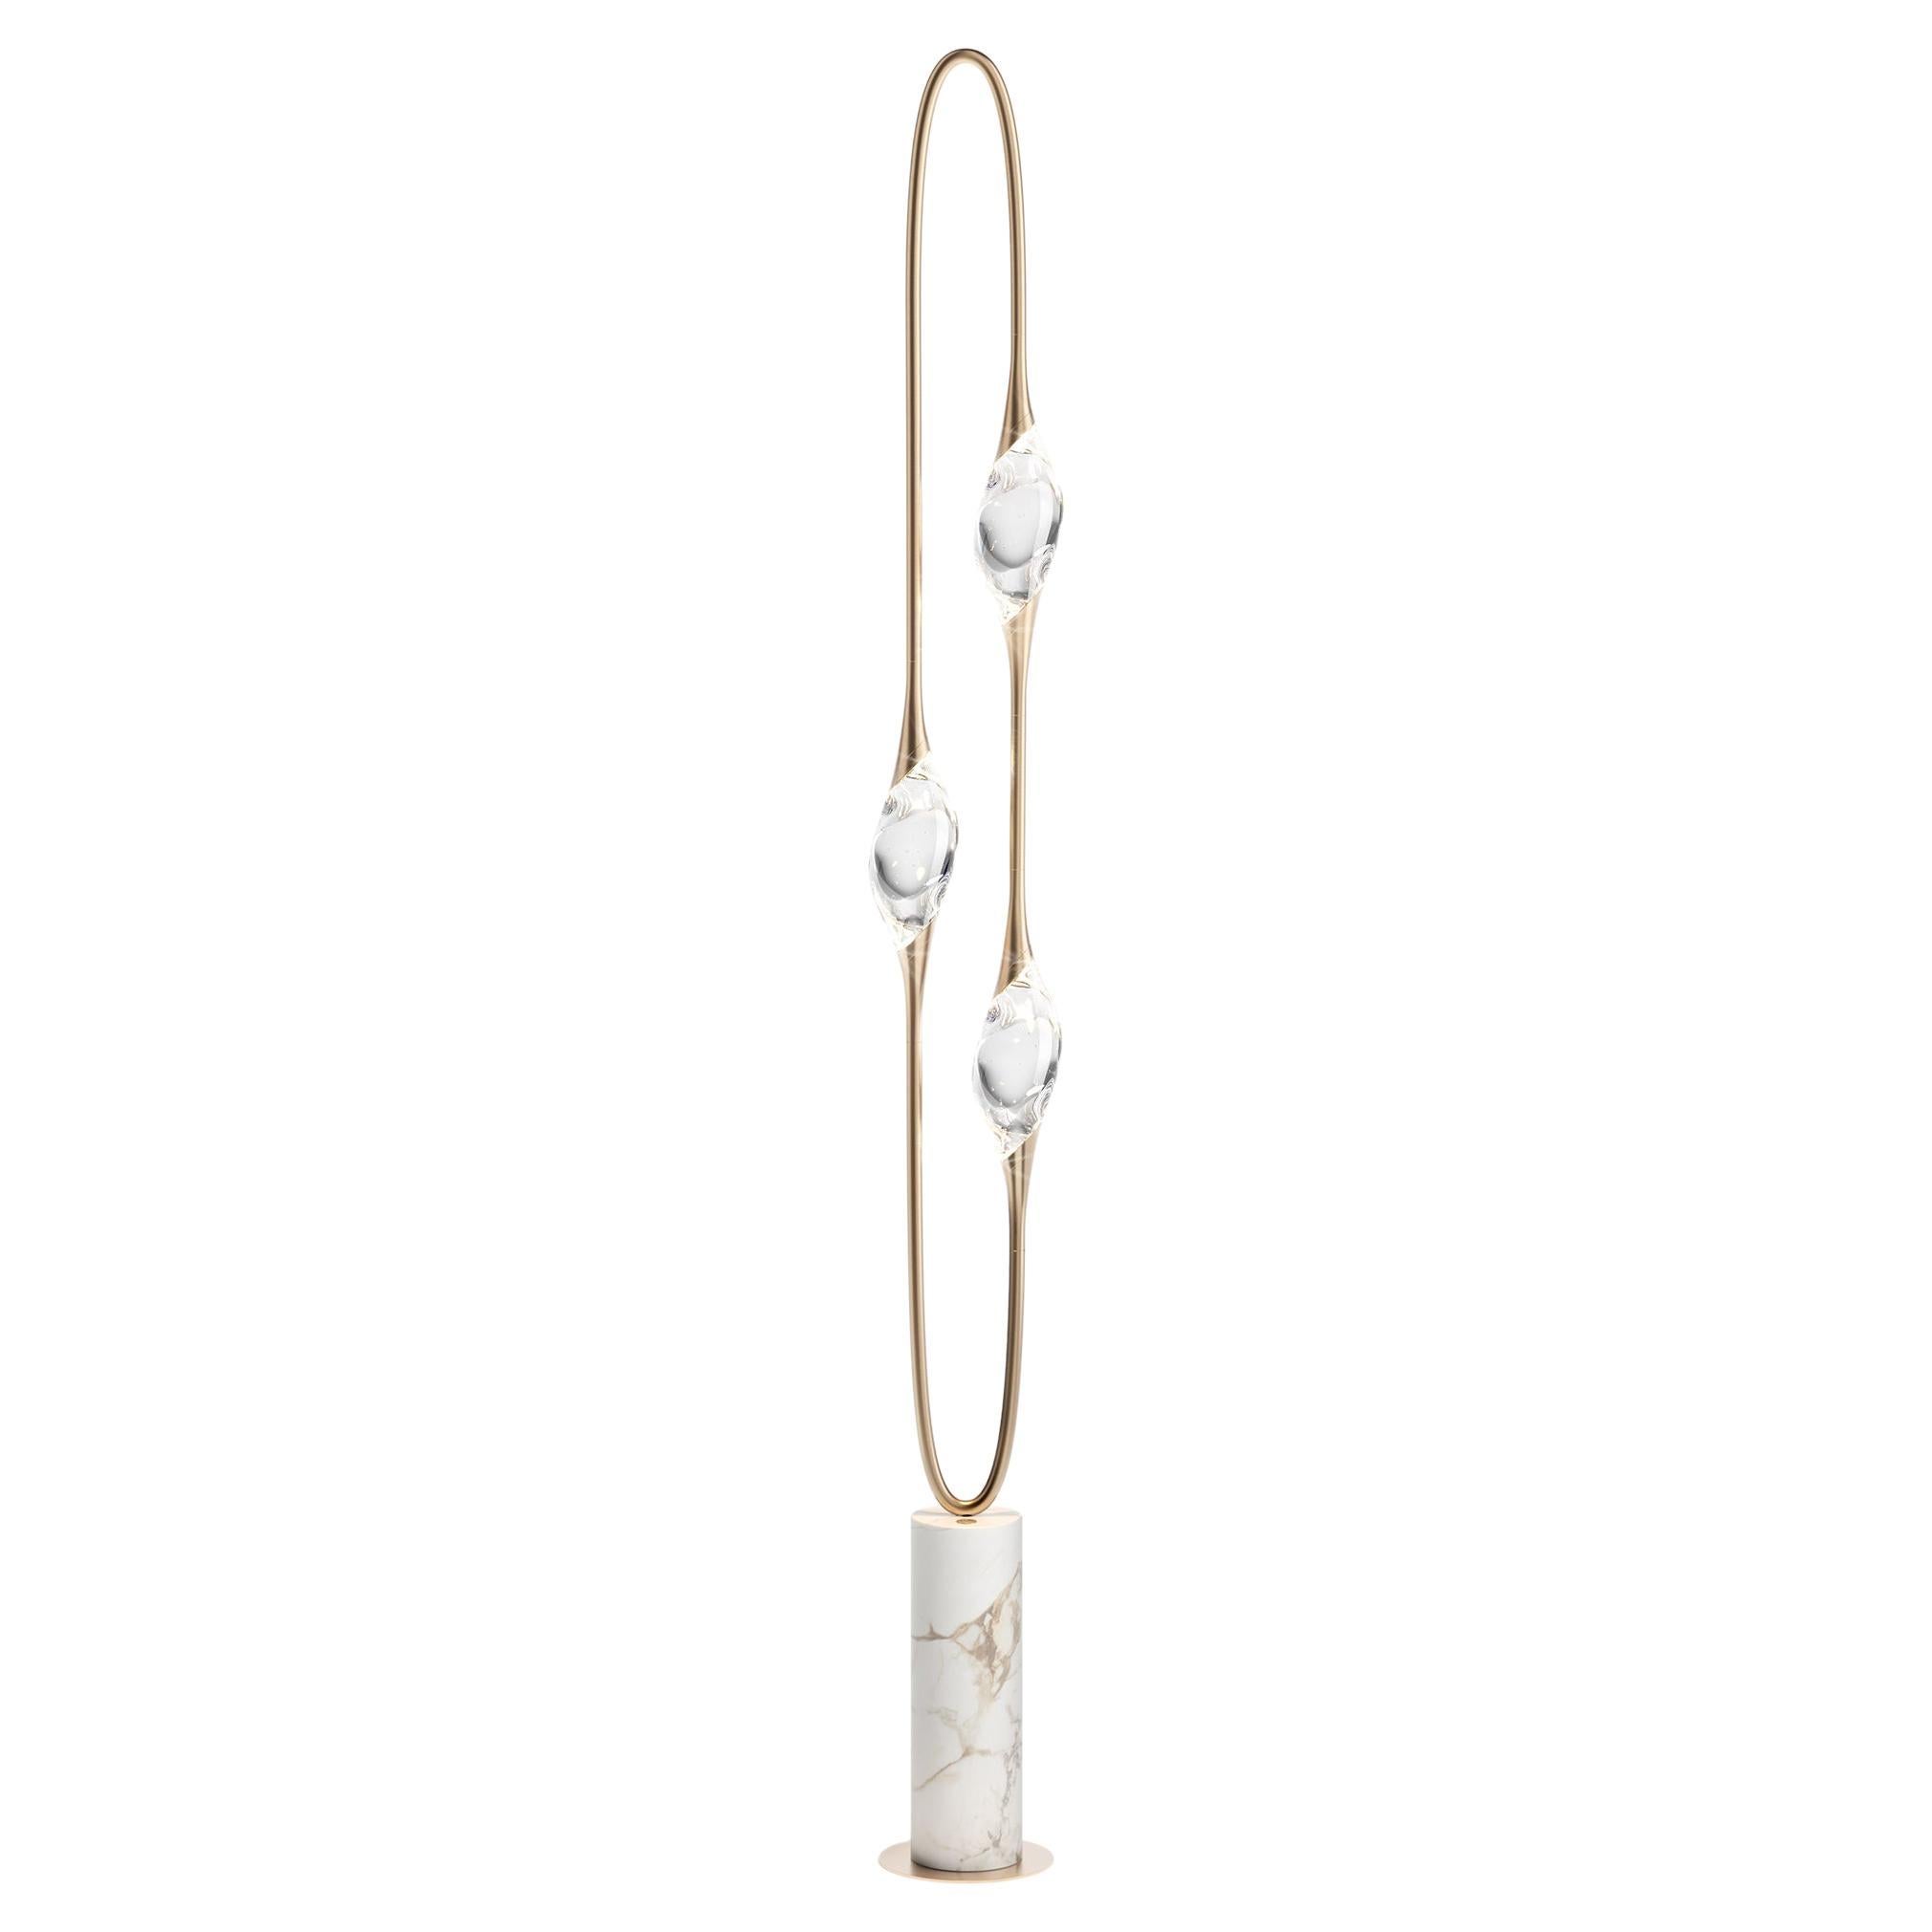 "Il Pezzo 12 Floor Lamp" - satin brass - calacatta marble - crystals - LEDs For Sale